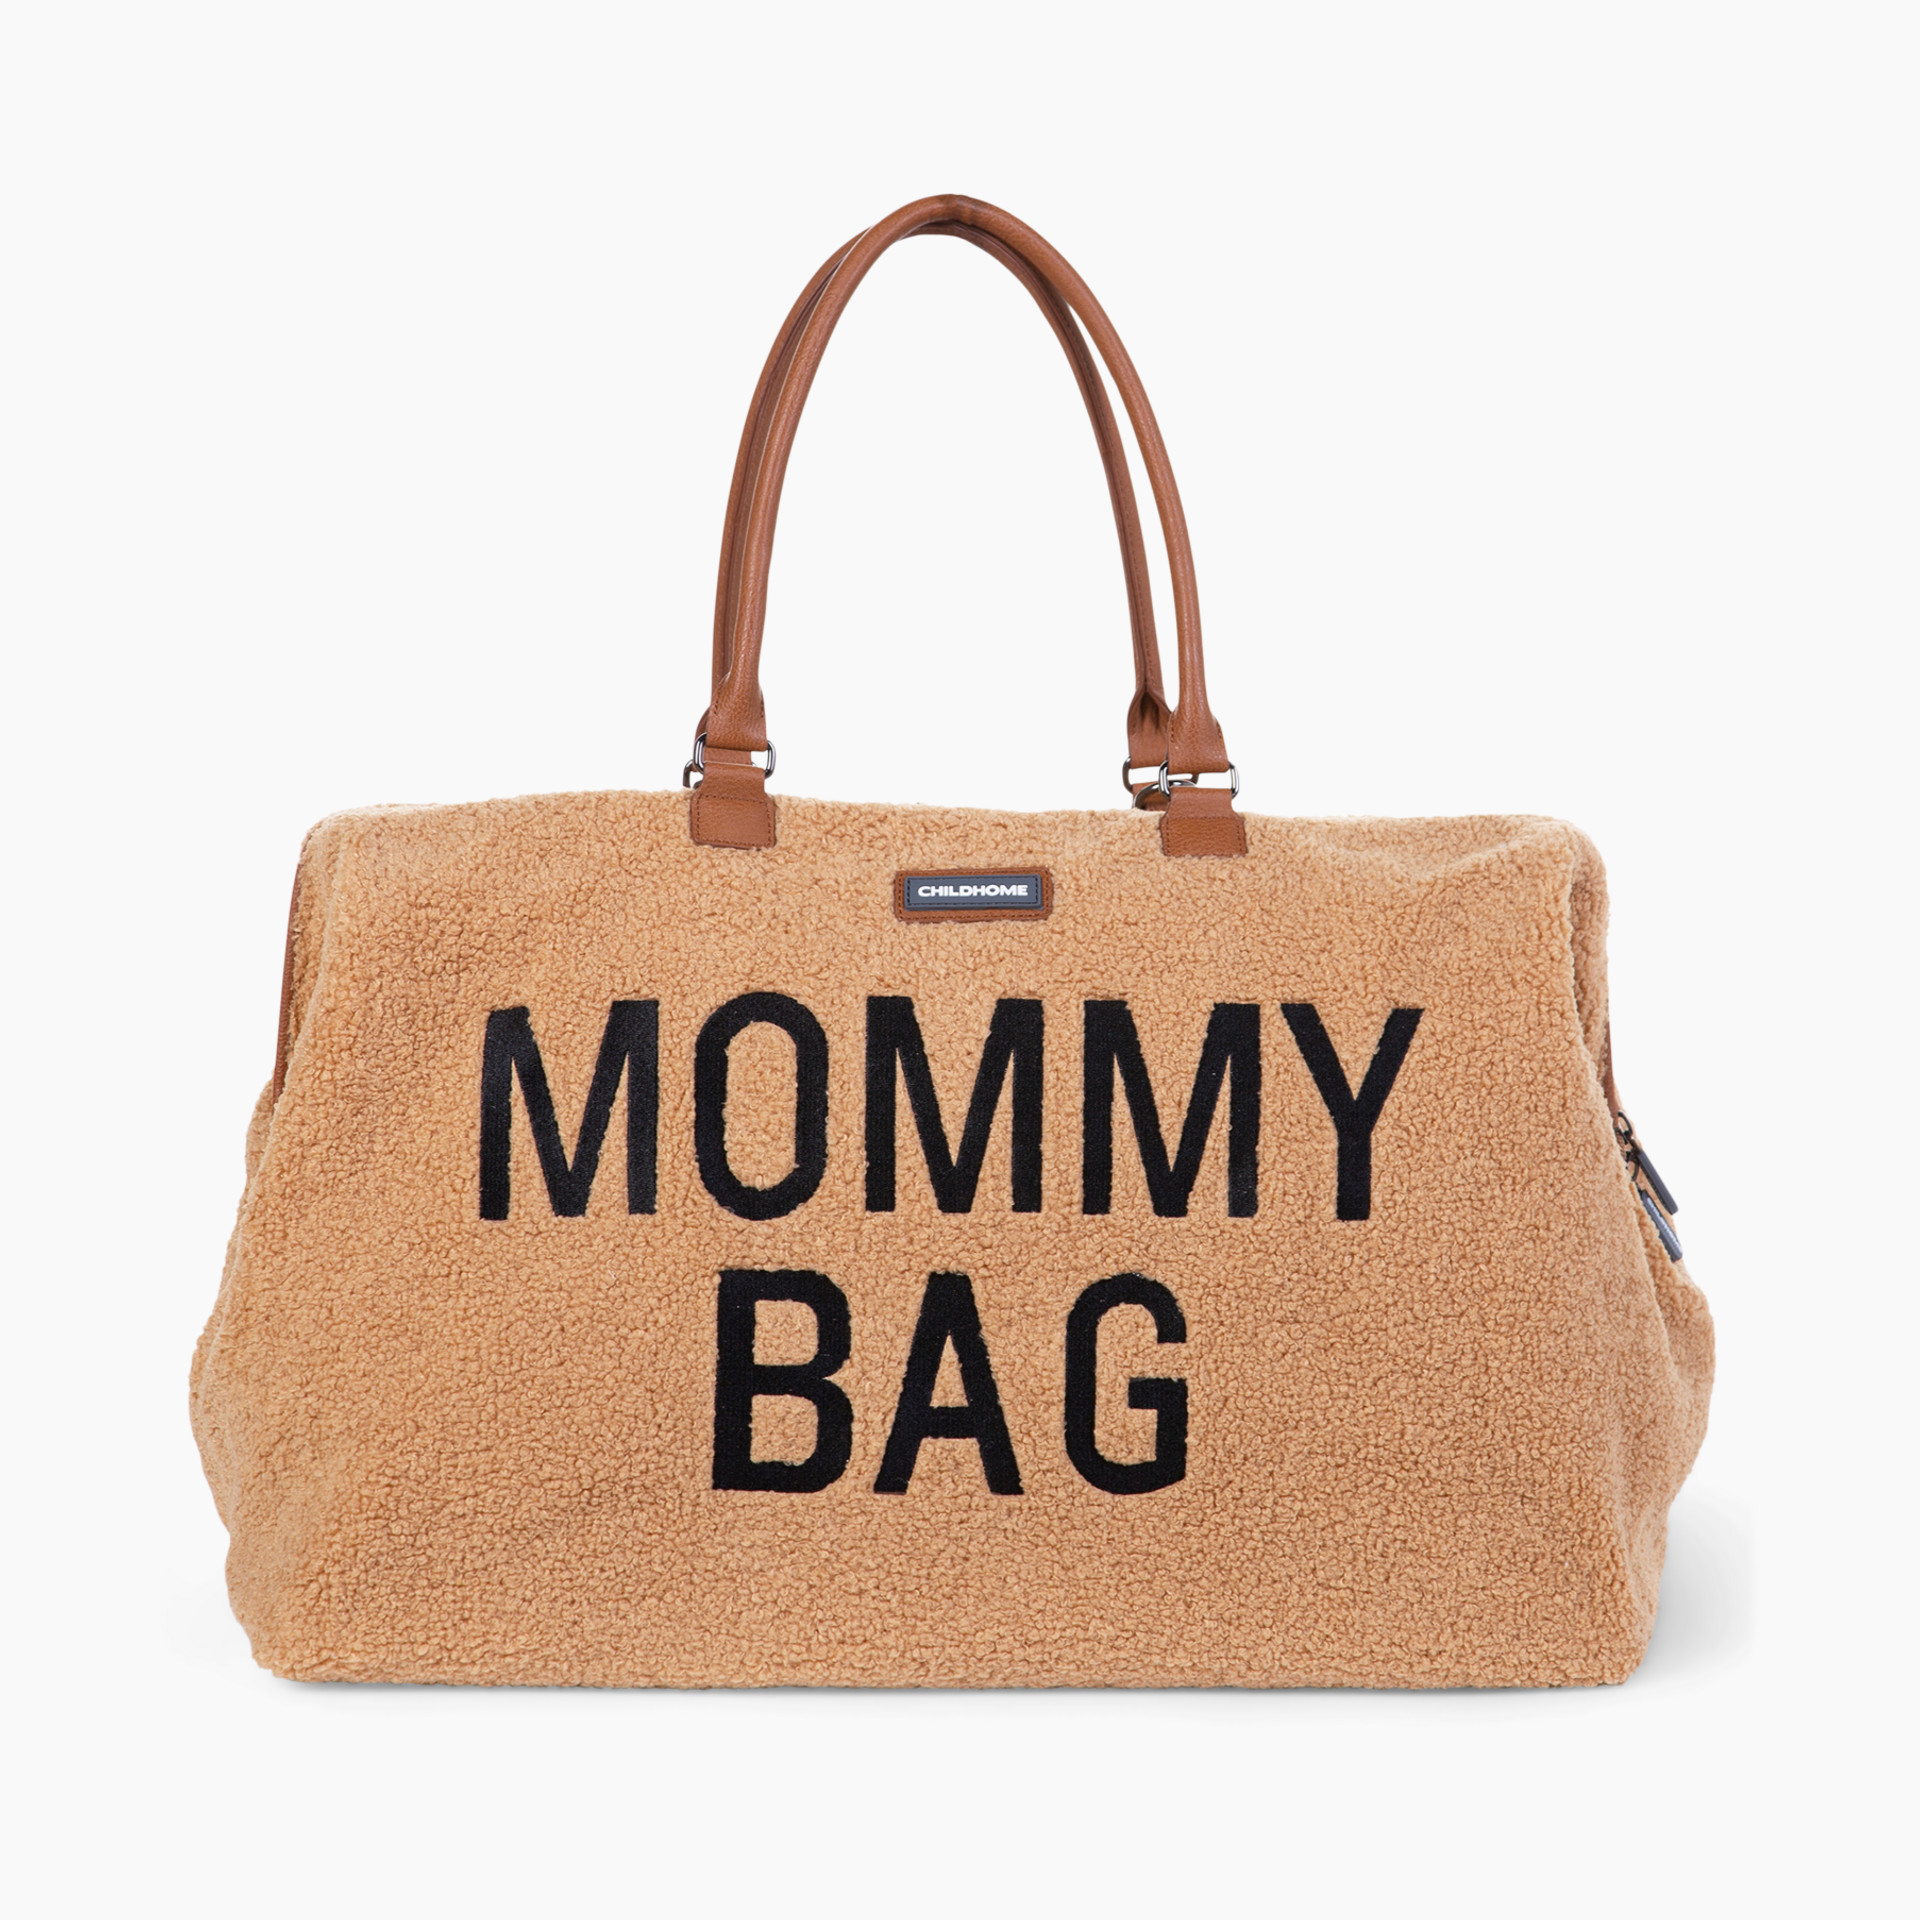  Childhome The Original Mommy Bag, Large Baby Diaper